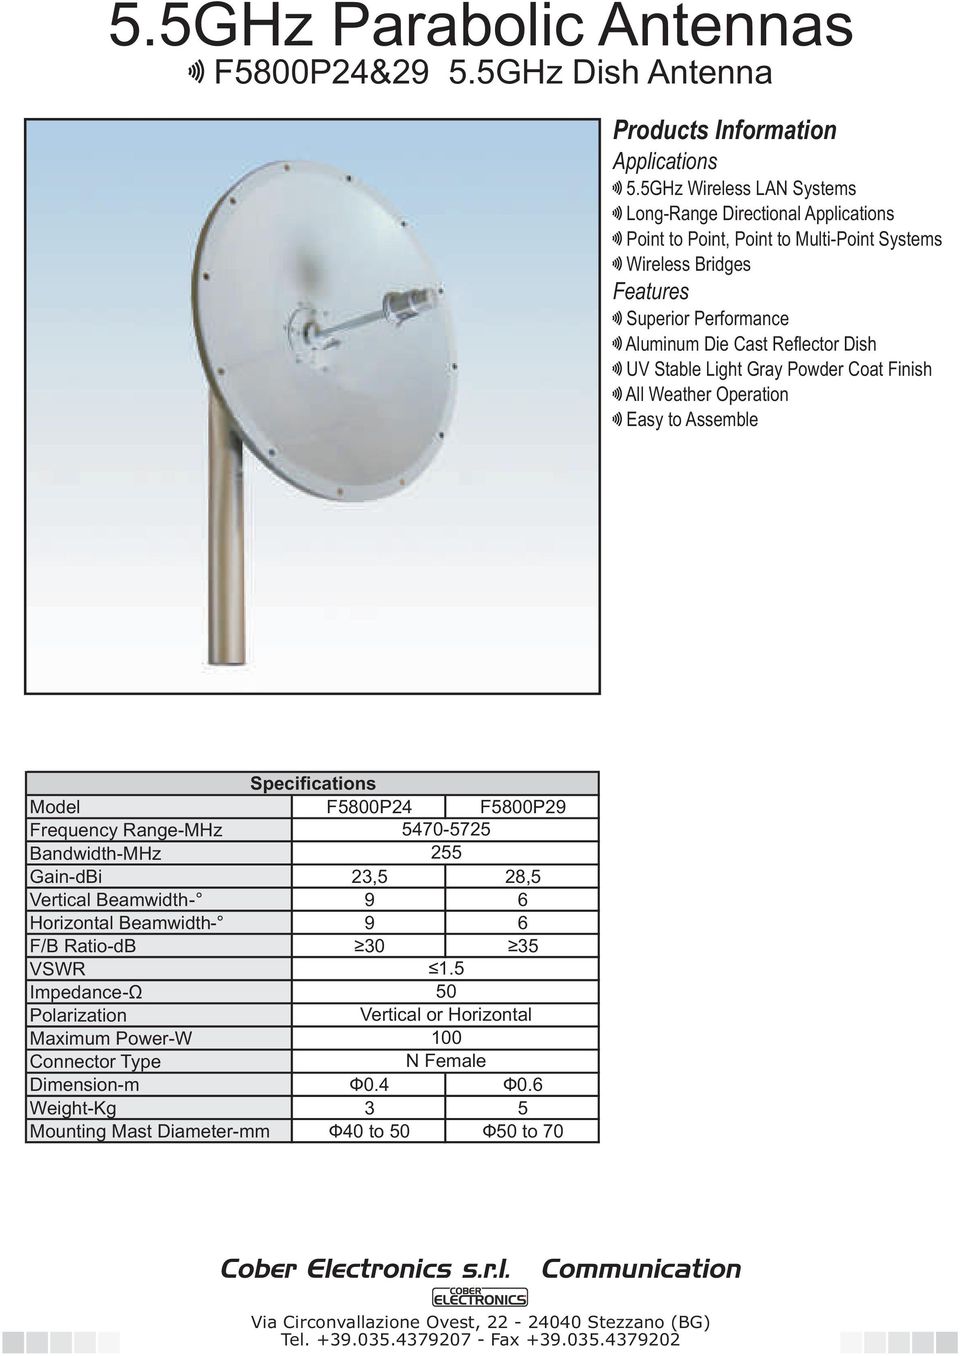 Reflector Dish UV Stable Light Gray Powder Coat Finish All Weather Operation Easy to Assemble Specifications Model F5800P24 F5800P29 Frequency Range-MHz Bandwidth-MHz 5470-5725